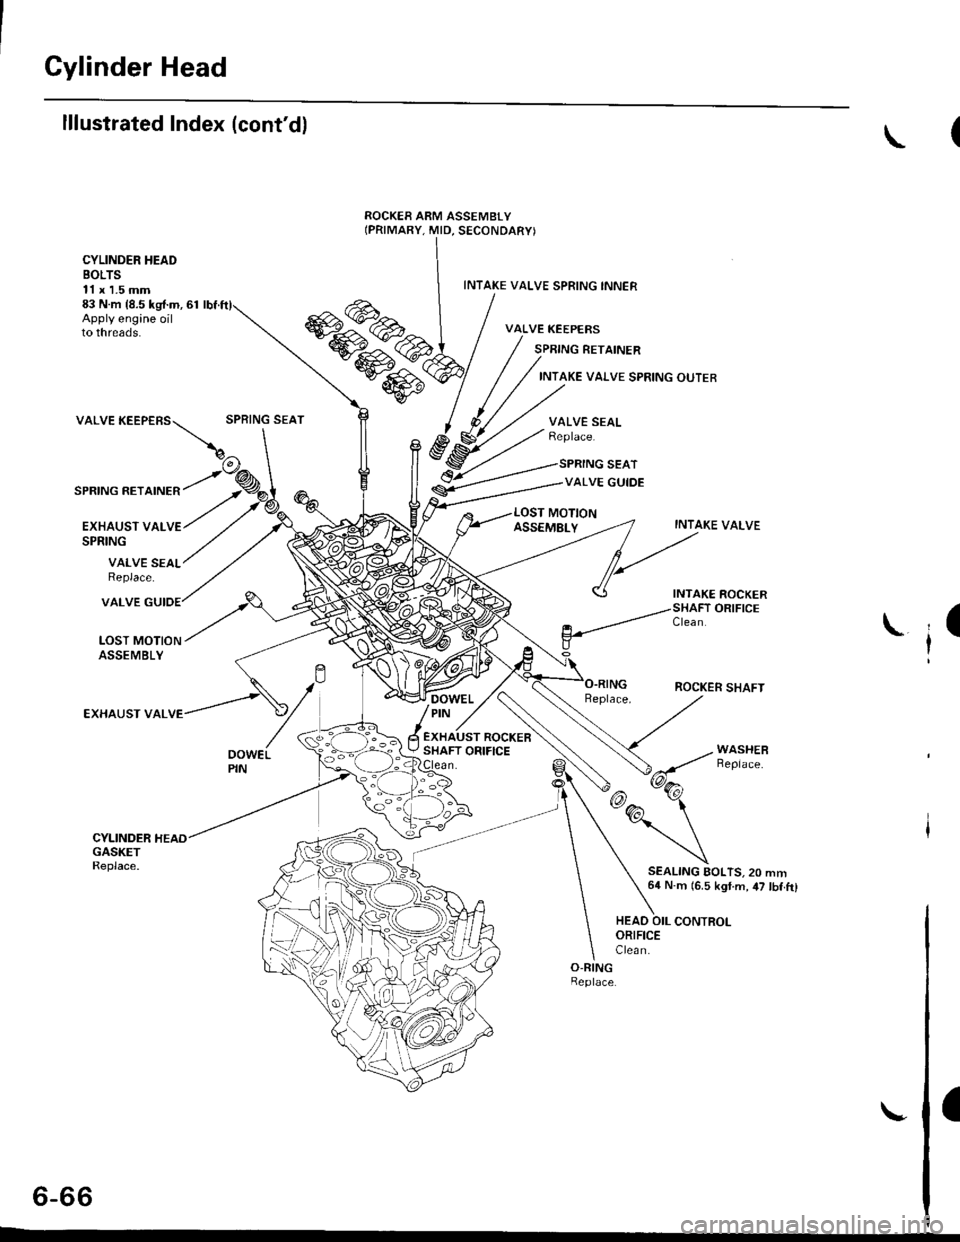 HONDA CIVIC 1998 6.G Service Manual Cylinder Head
lllustrated Index (contdl
CYLINDER HEADBOLTS11 x 1.5 mm83 N.m {8.5 kg{.m, 61Apply engine oilto threads.
INTAKE VALVE SPRING INNER
VALVE KEEPERS
SPRING RETAINER
INTAKE VAI.VE SPRING OUTE